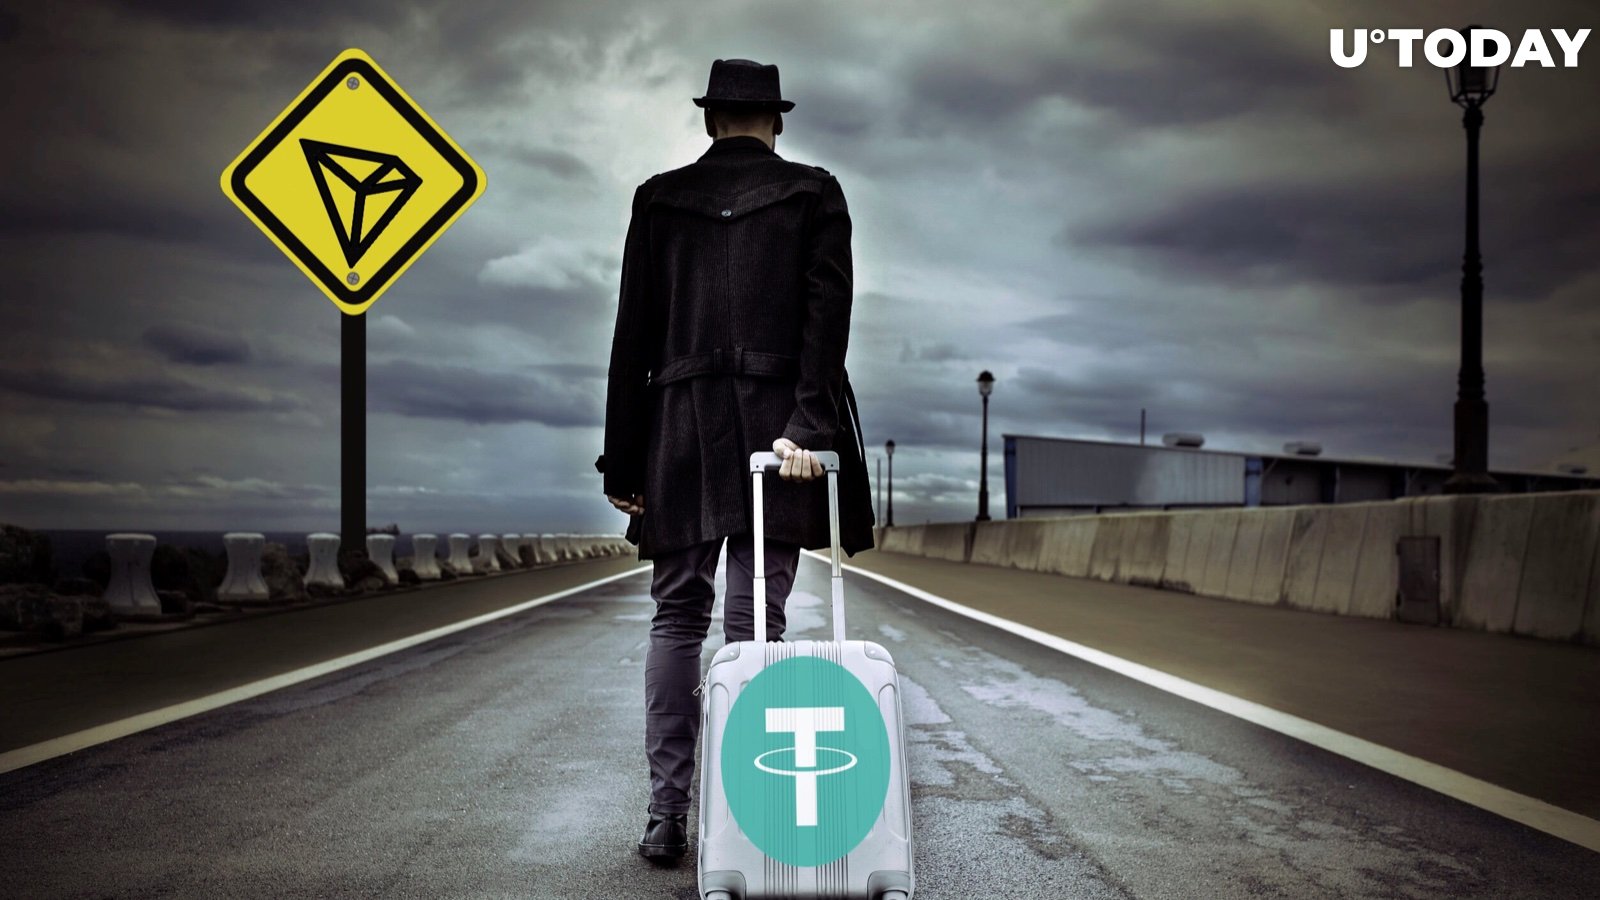 Tron (TRX) Got 3.5% of Tether (USDT) on Its Protocol, Migration Continues